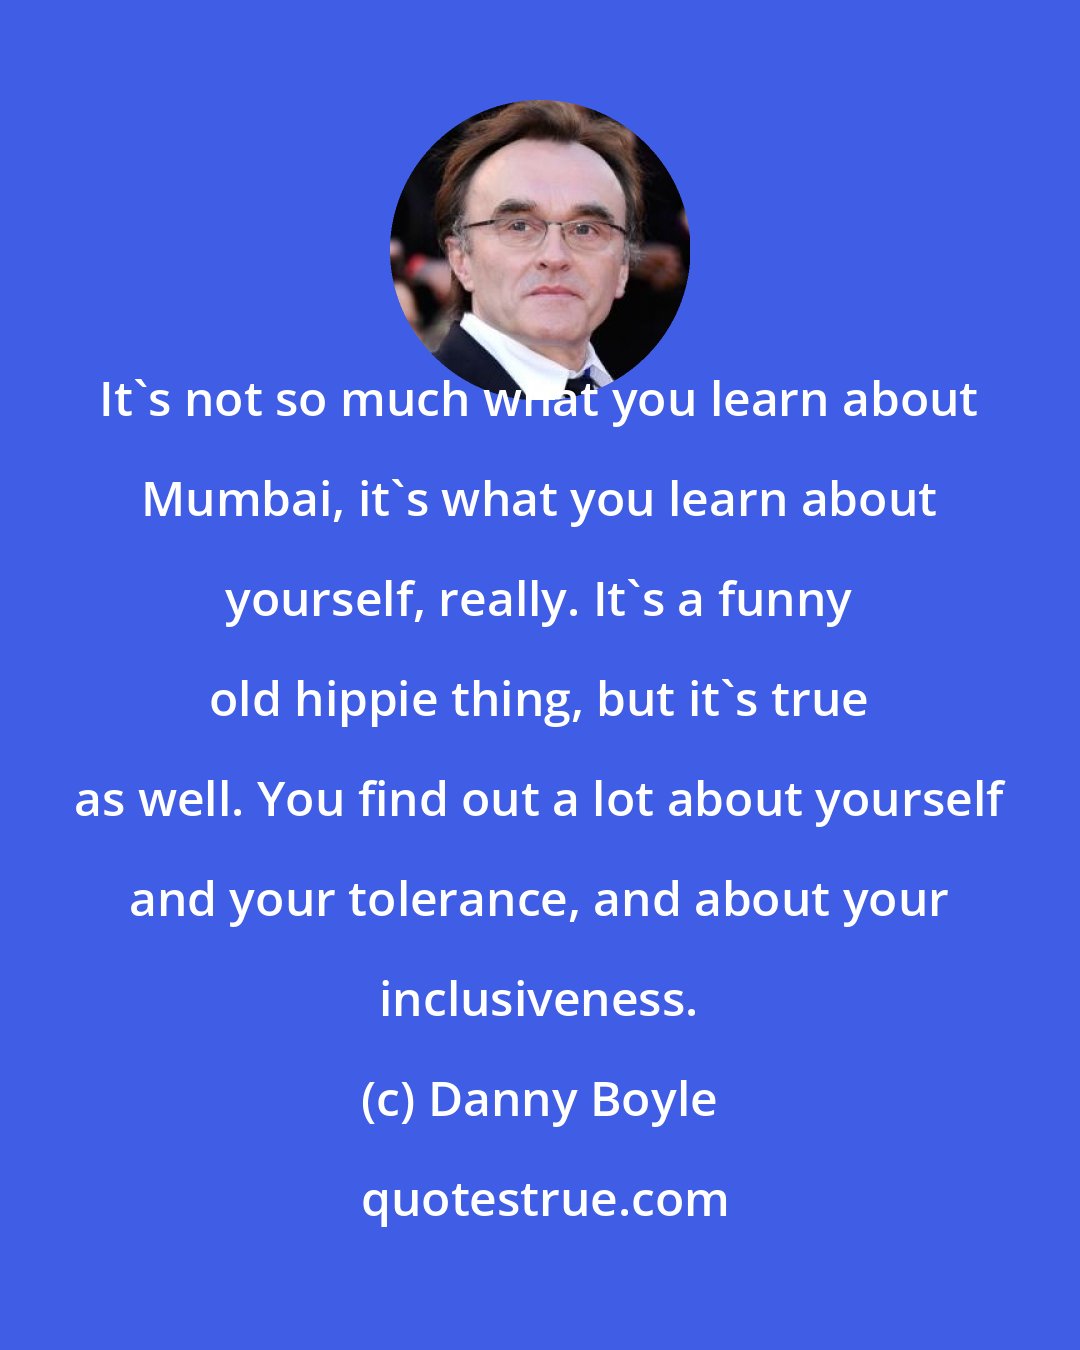 Danny Boyle: It's not so much what you learn about Mumbai, it's what you learn about yourself, really. It's a funny old hippie thing, but it's true as well. You find out a lot about yourself and your tolerance, and about your inclusiveness.